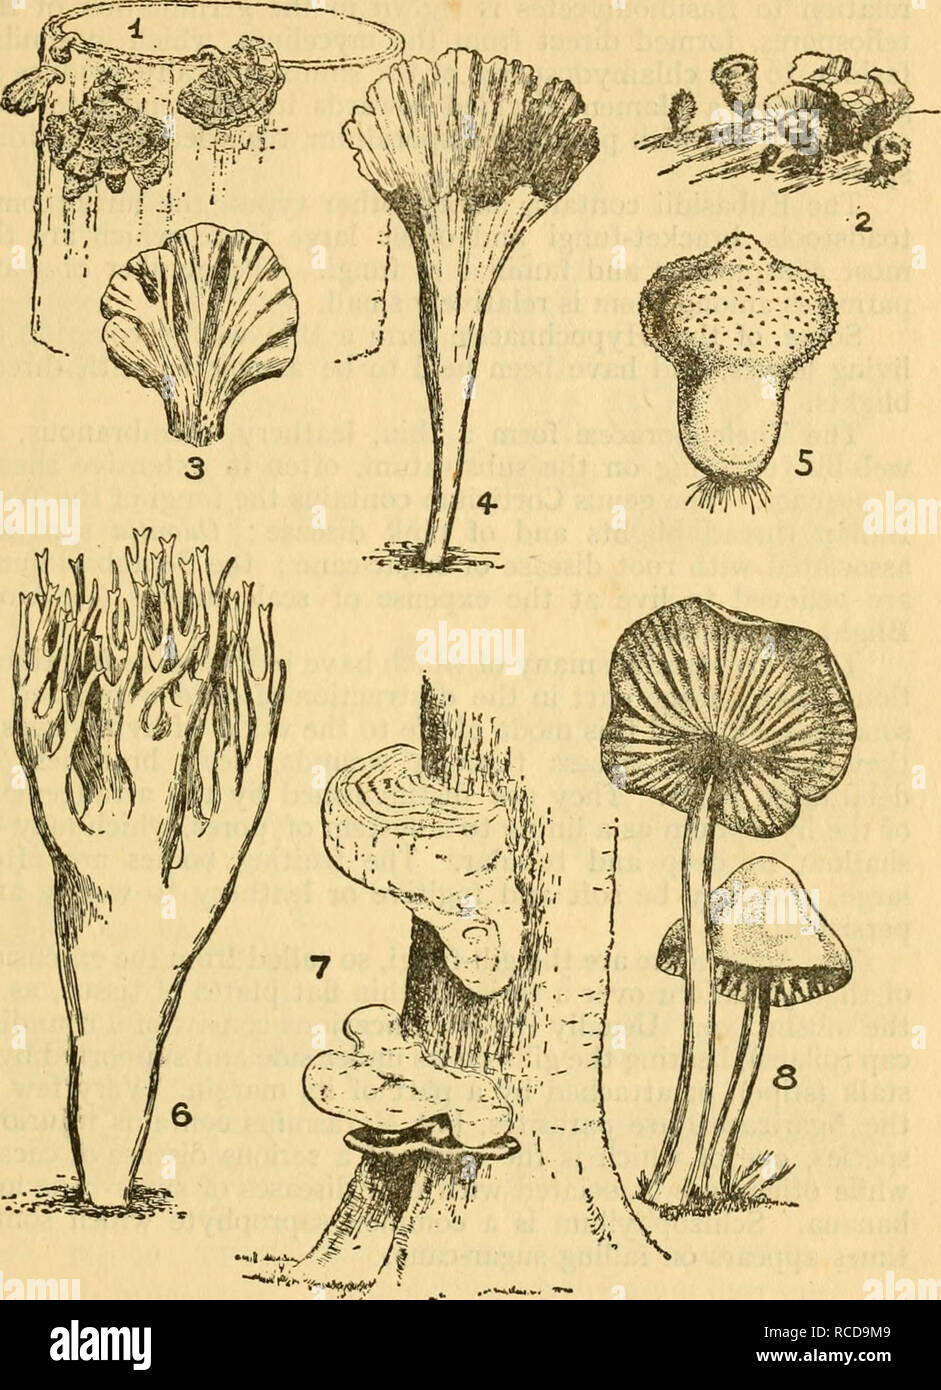 . Diseases of crop-plants in the Lesser Antilles. Tropical plants; Plant diseases. DISEASES CAUSED BY FUNGI 39 which develop a small number of conidia (sporidia), regarded as equivalent to basidiospores. In the Tilletiaceae the sporidia. Fig. 9 BASIDIOMYCETES 1. SCHIZOPHYLLUM CoMMUNE. 2. CyATHUS MiCROSPORUS. 3. Thelephora. 4. Craterellus. 5. Lycoperdon. 6. Lachnocladium. 7. Fomes. 8. Marasmius. 4, 5, 6, 8 after Nat. Pflanz are elongated and frequently join by a small cross filament to make pairs.. Please note that these images are extracted from scanned page images that may have been digitally Stock Photo